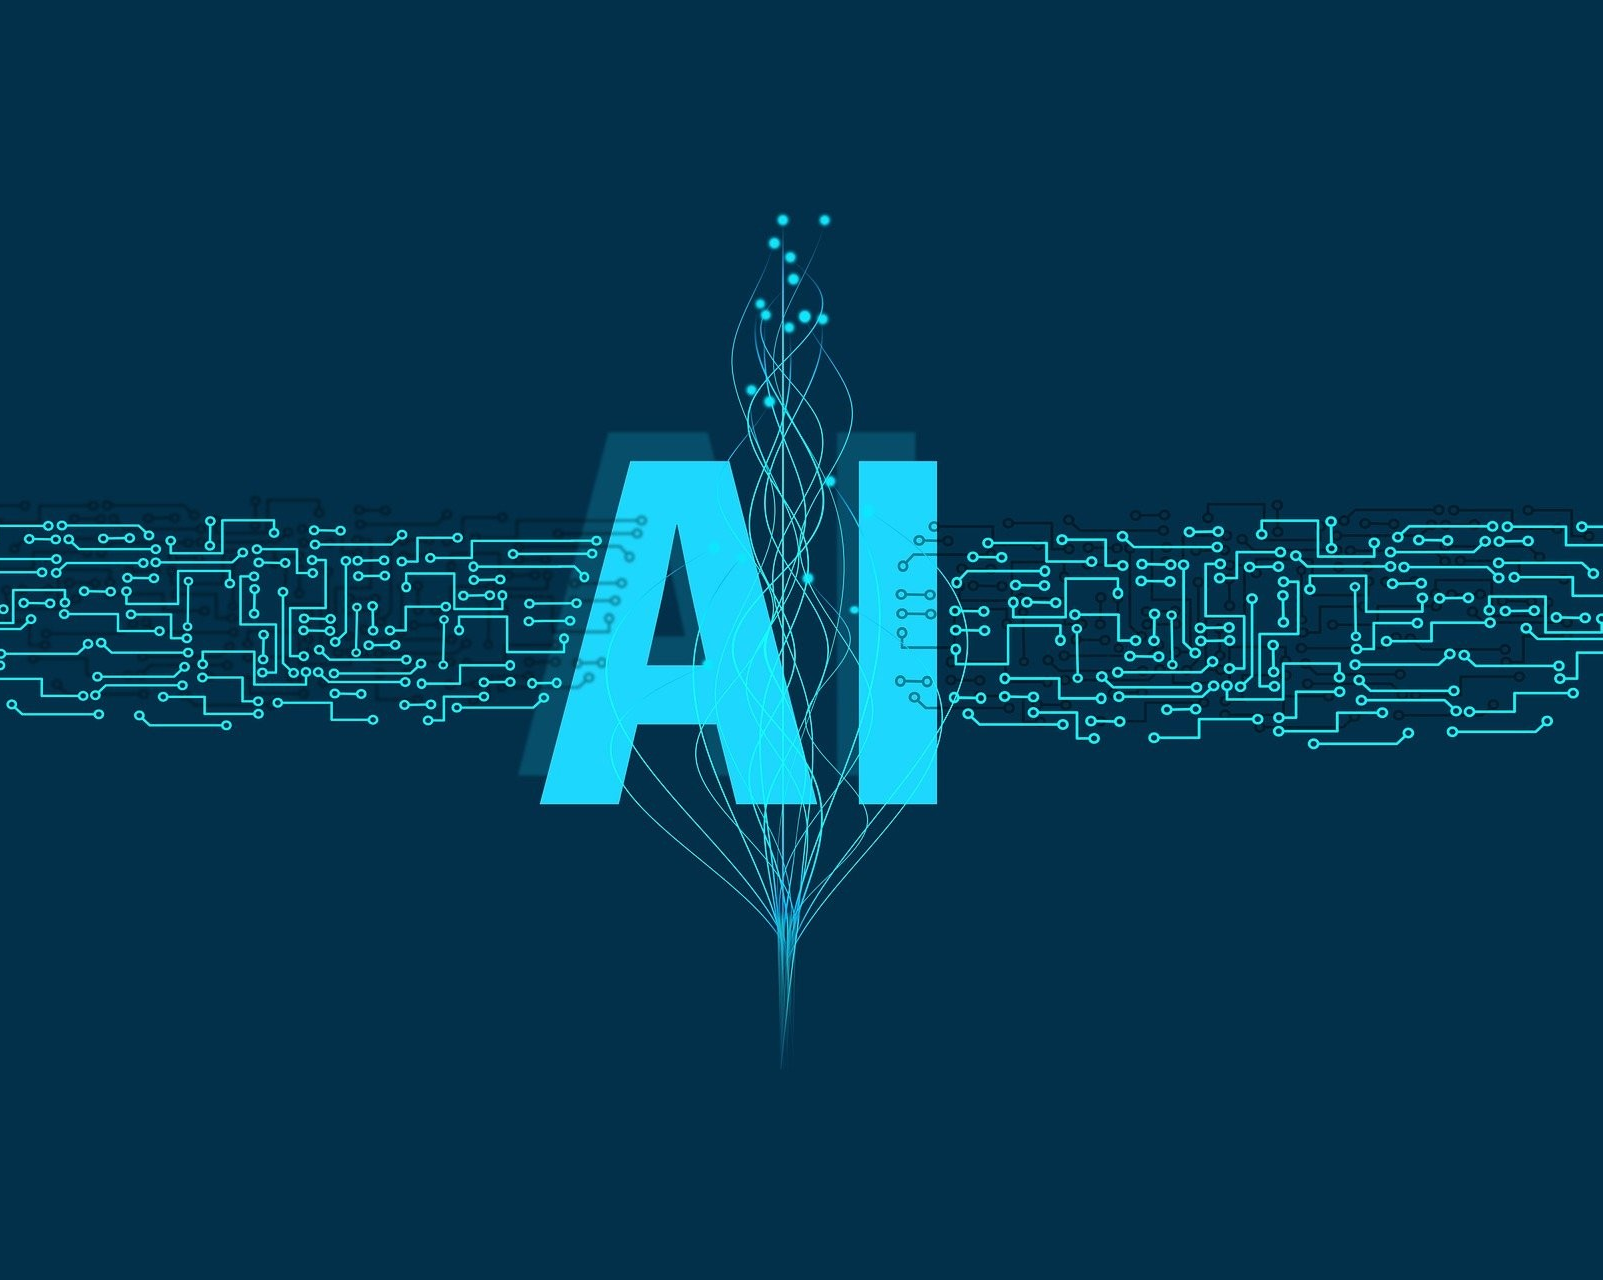 The legal and ethical aspects of AI